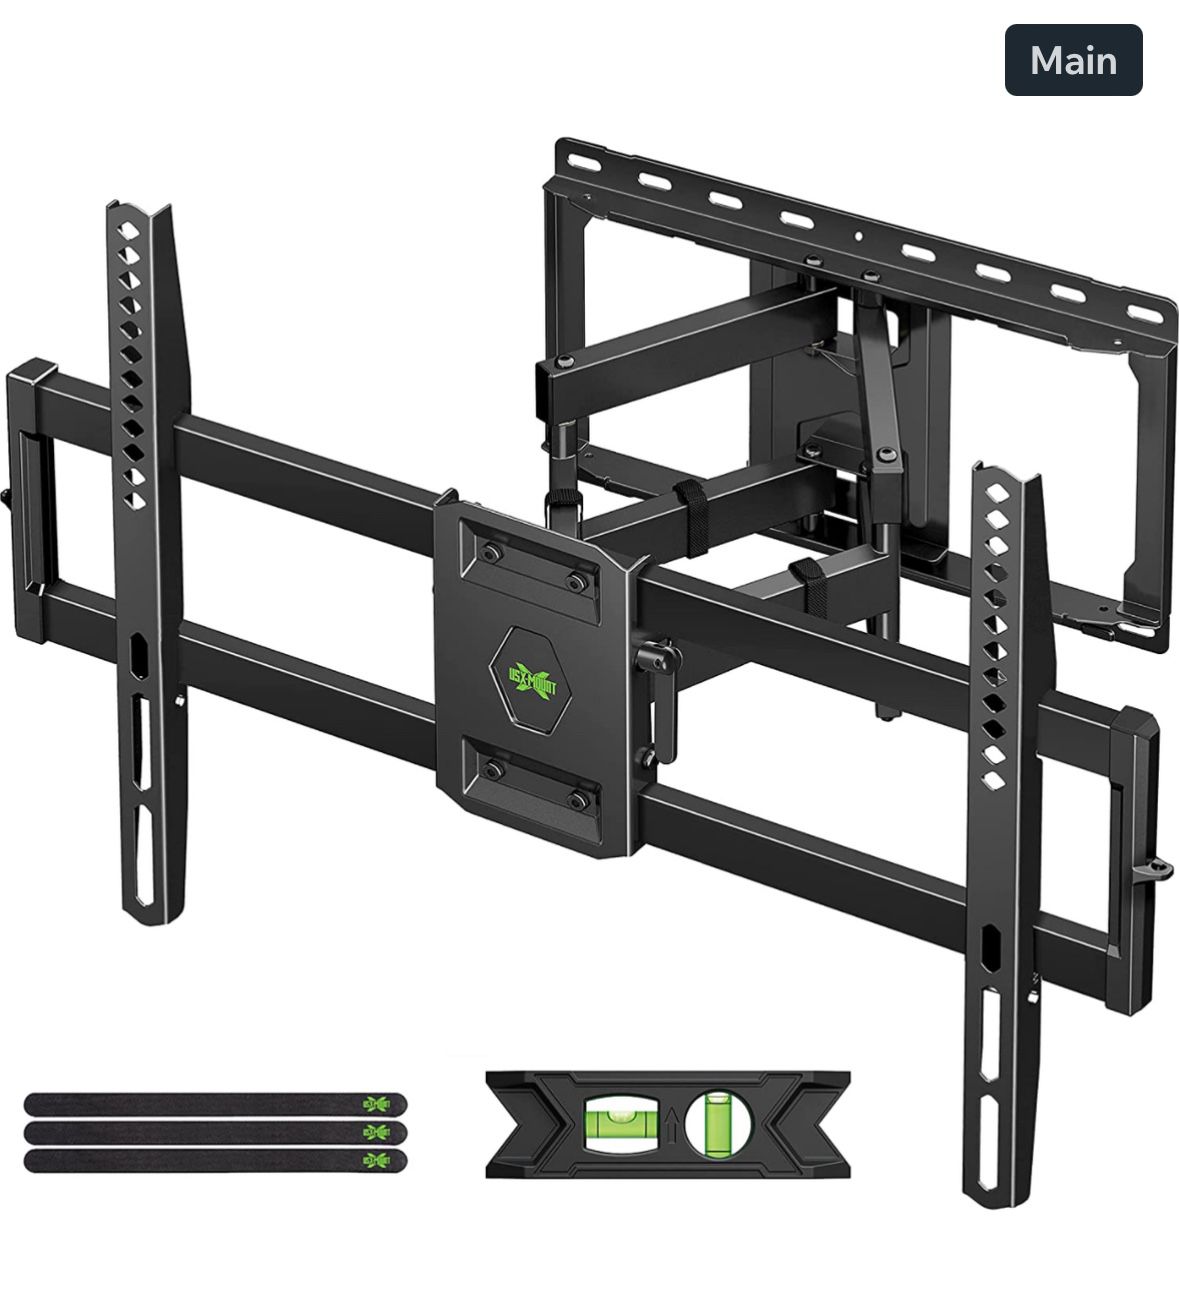 USX MOUNT Full Motion TV Wall Mount for Most 47-84 inch Flat Screen